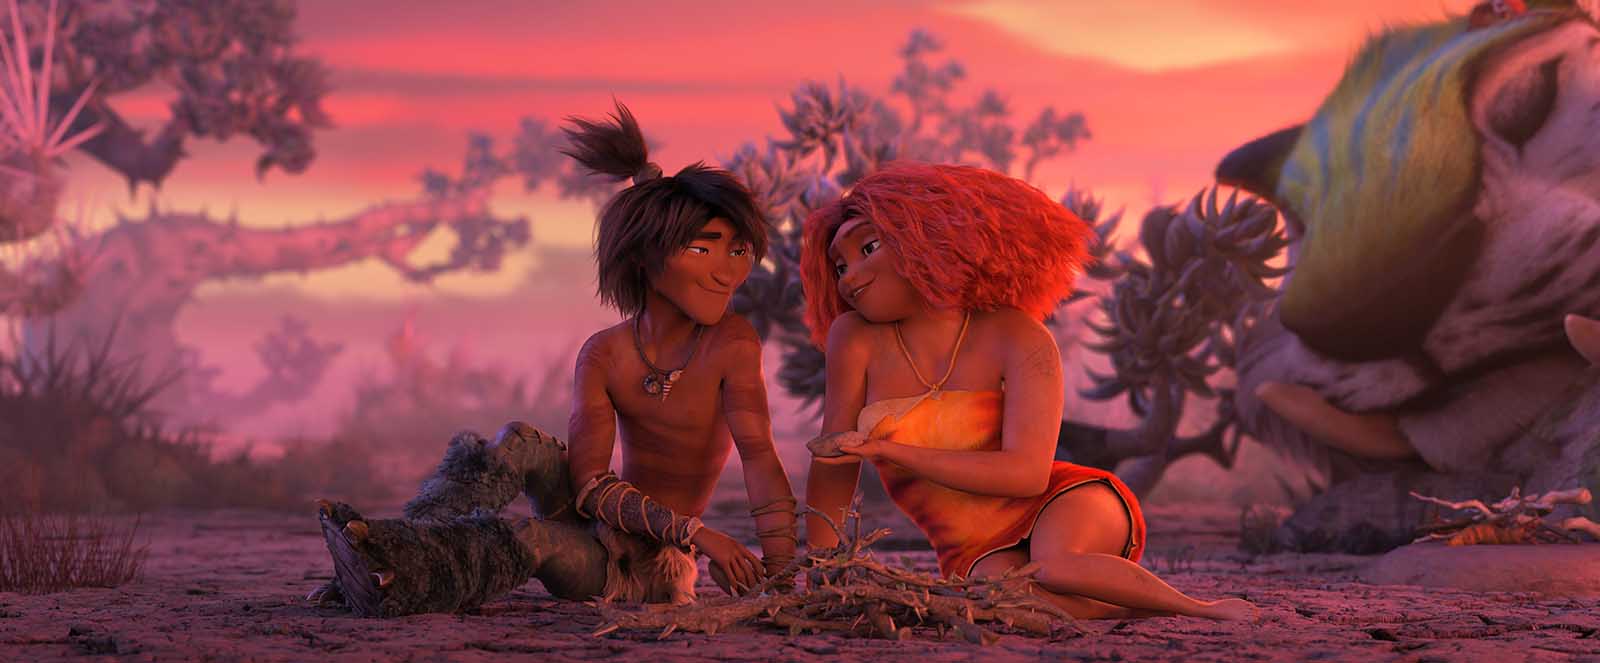 Want to check out 'The Croods 2: A New Age'? Here's where you can watch the full movie online for free.